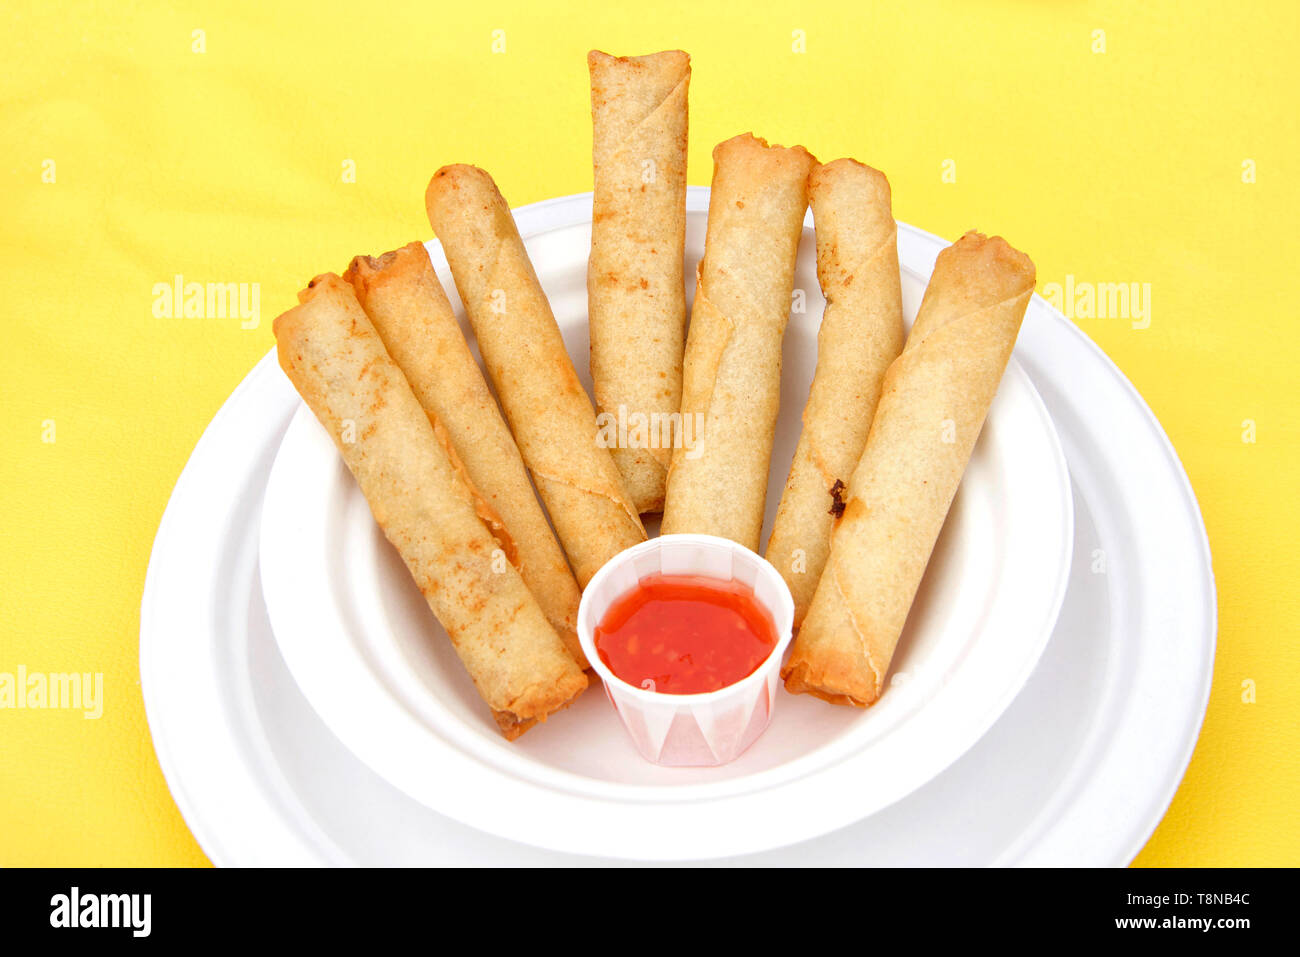 White paper plate with lumpia and dipping sauce on yellow table cloth. Popular street fair food. Stock Photo